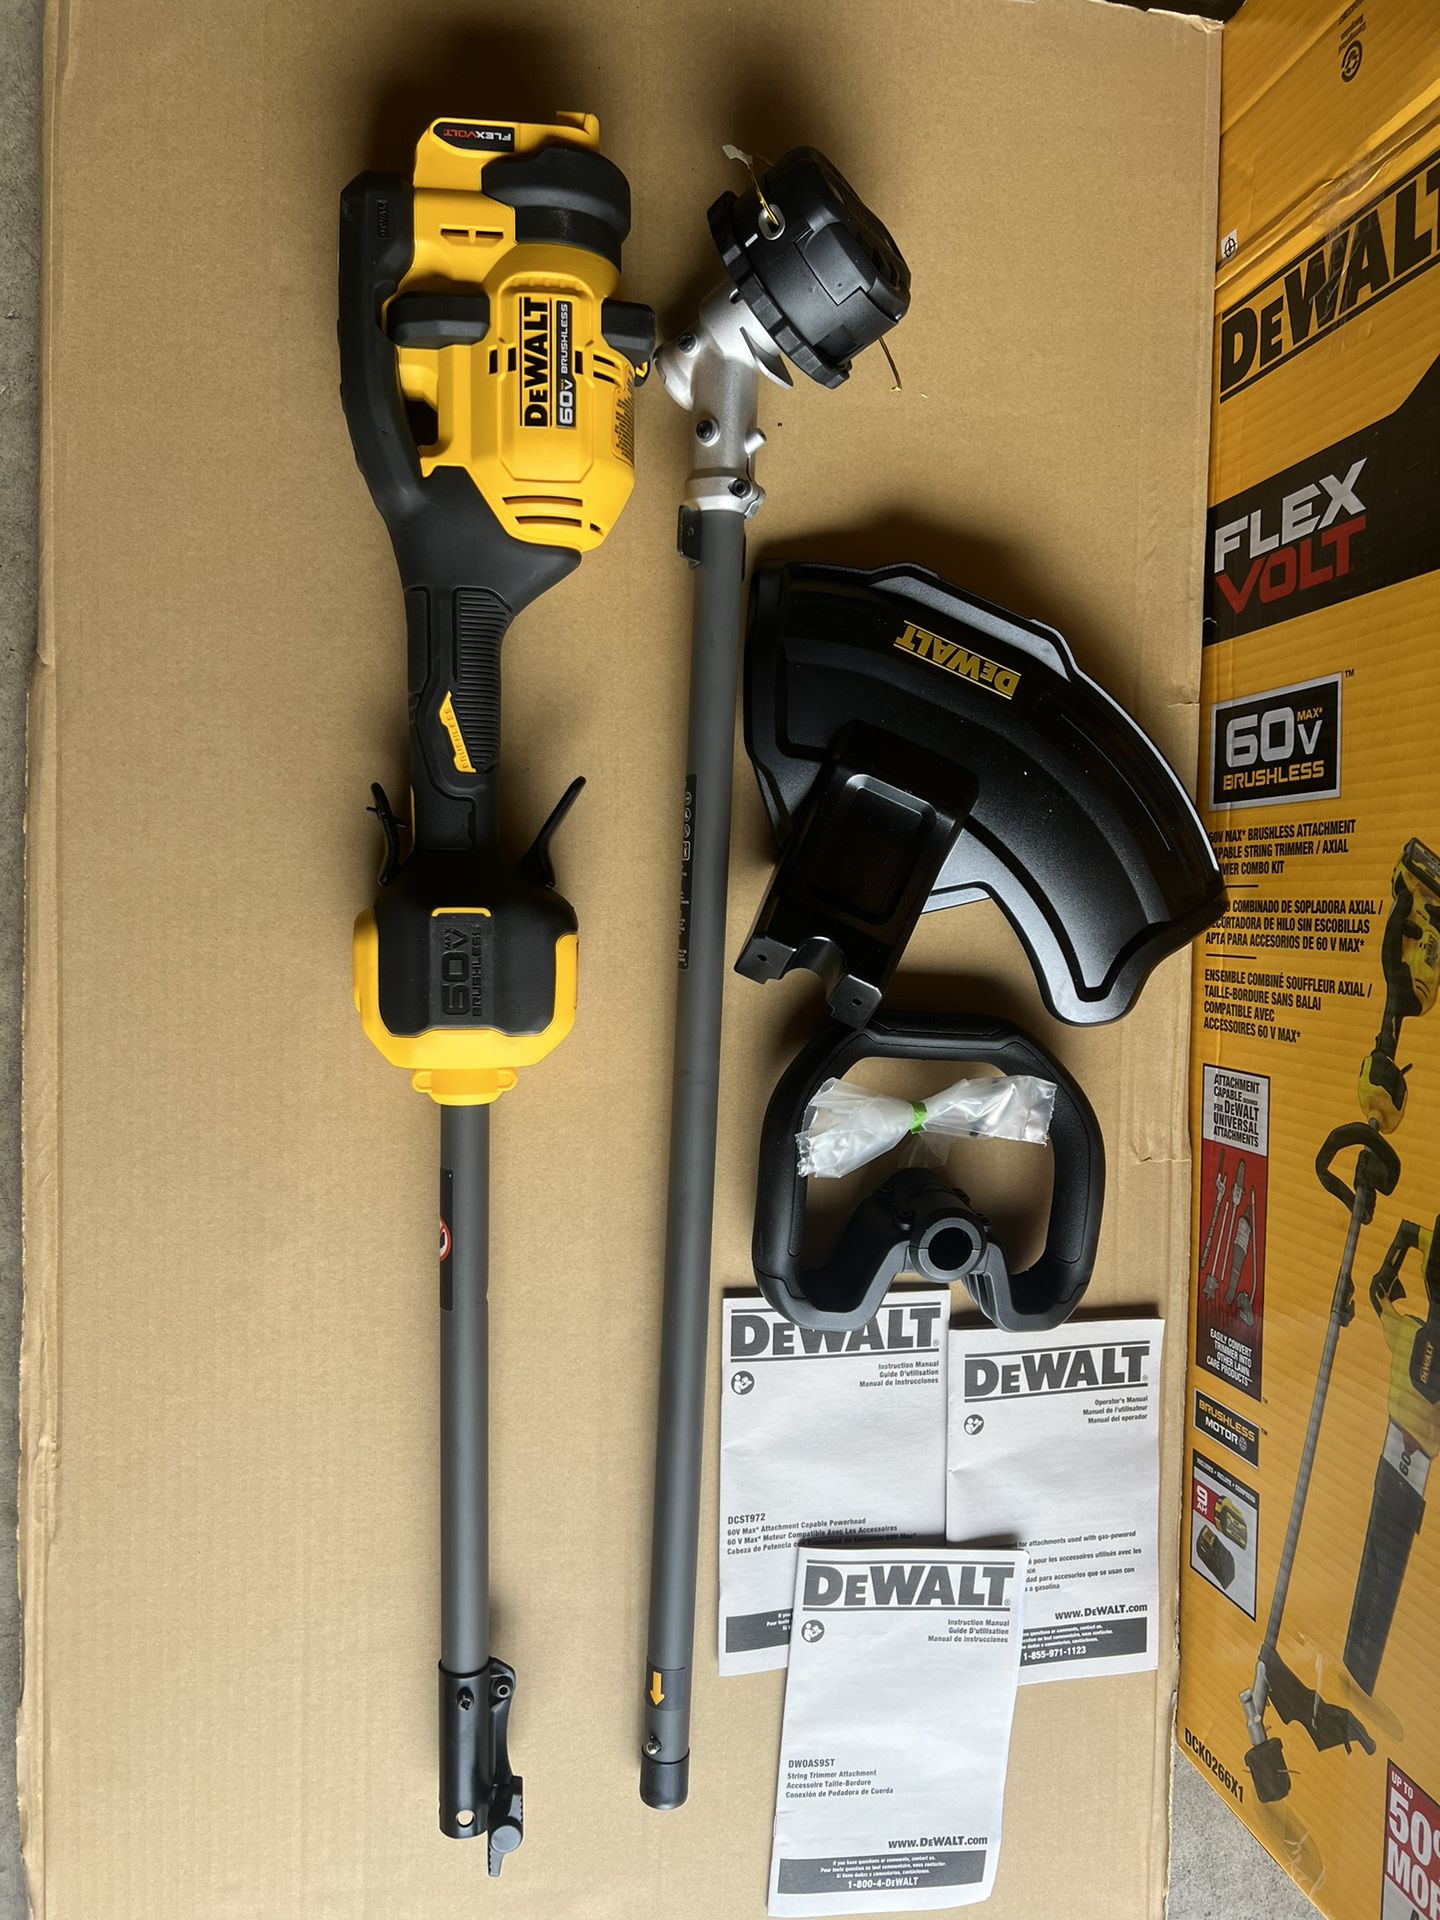 Dewalt DCST972B 60V MAX* 17" Attachment Capable String Trimmer (Tool Only)